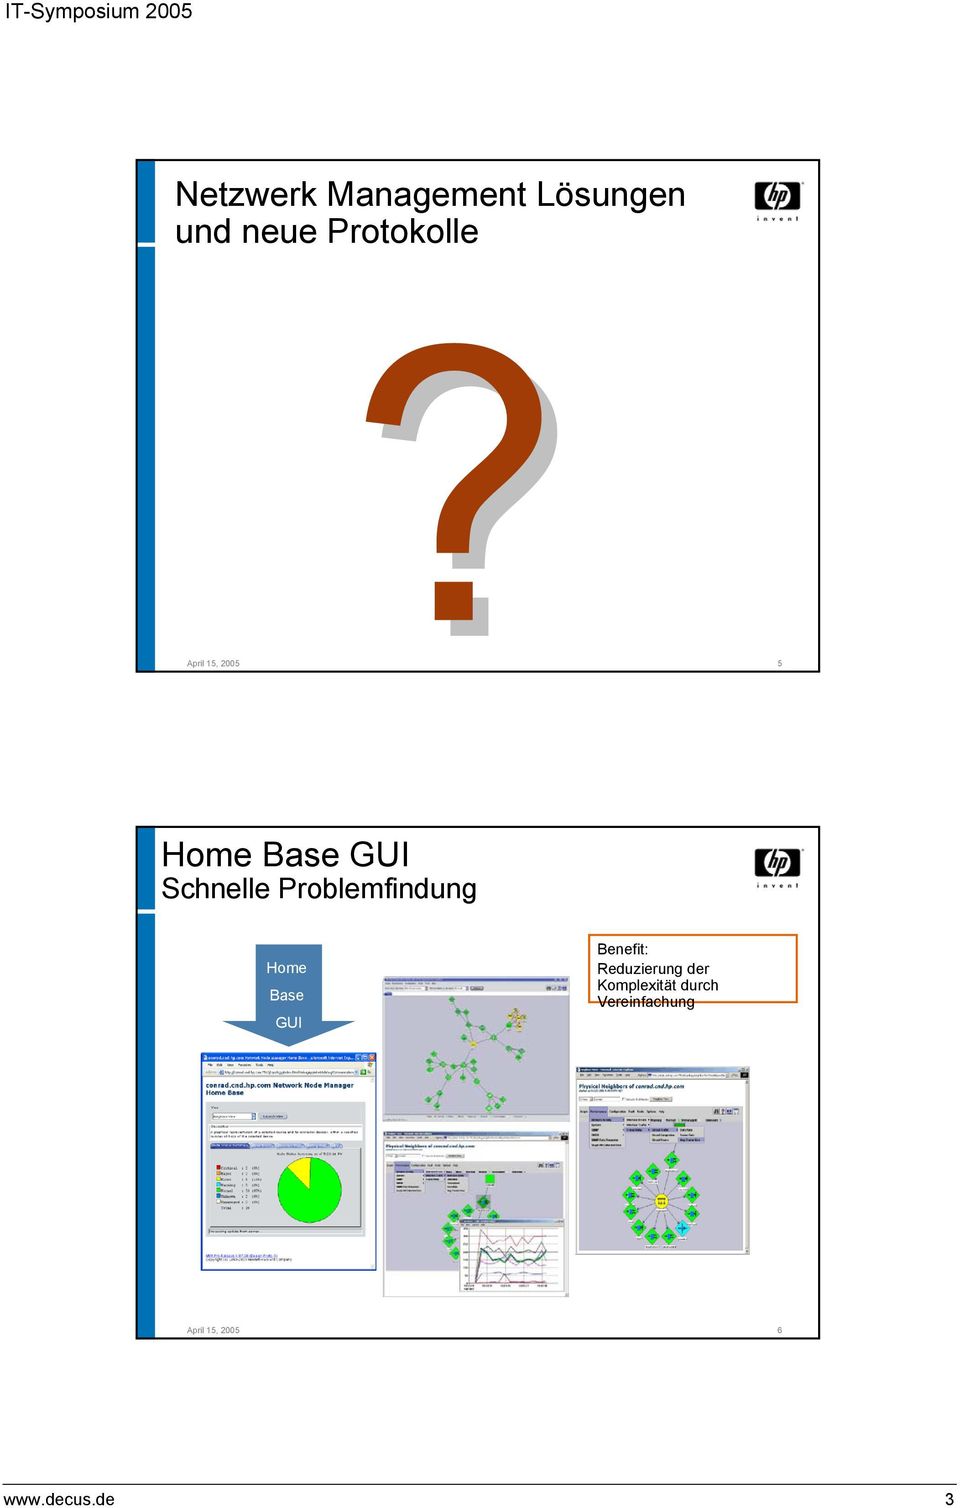 Problemfindung Home Base GUI Benefit: